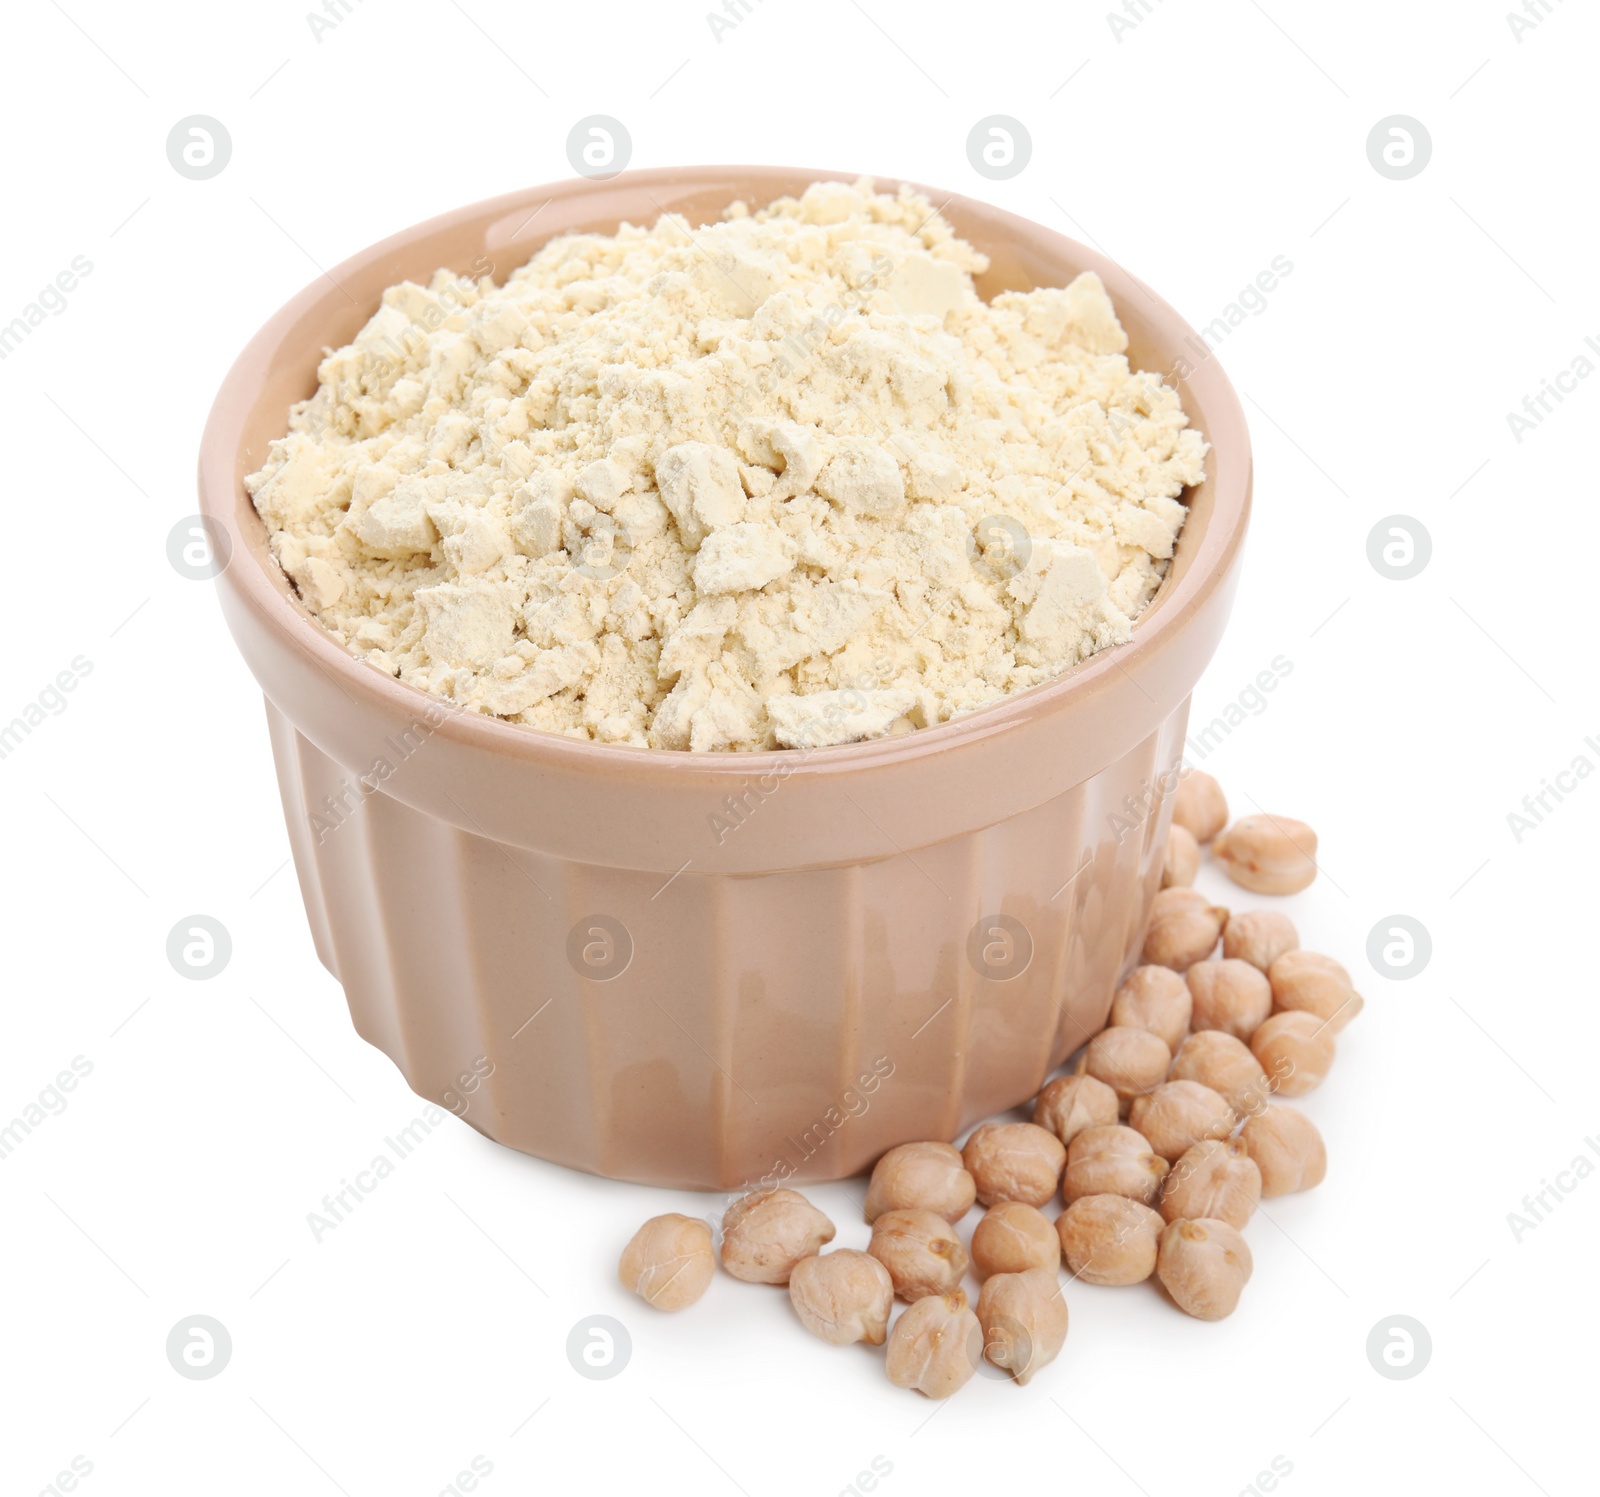 Photo of Chickpea flour in bowl and seeds isolated on white